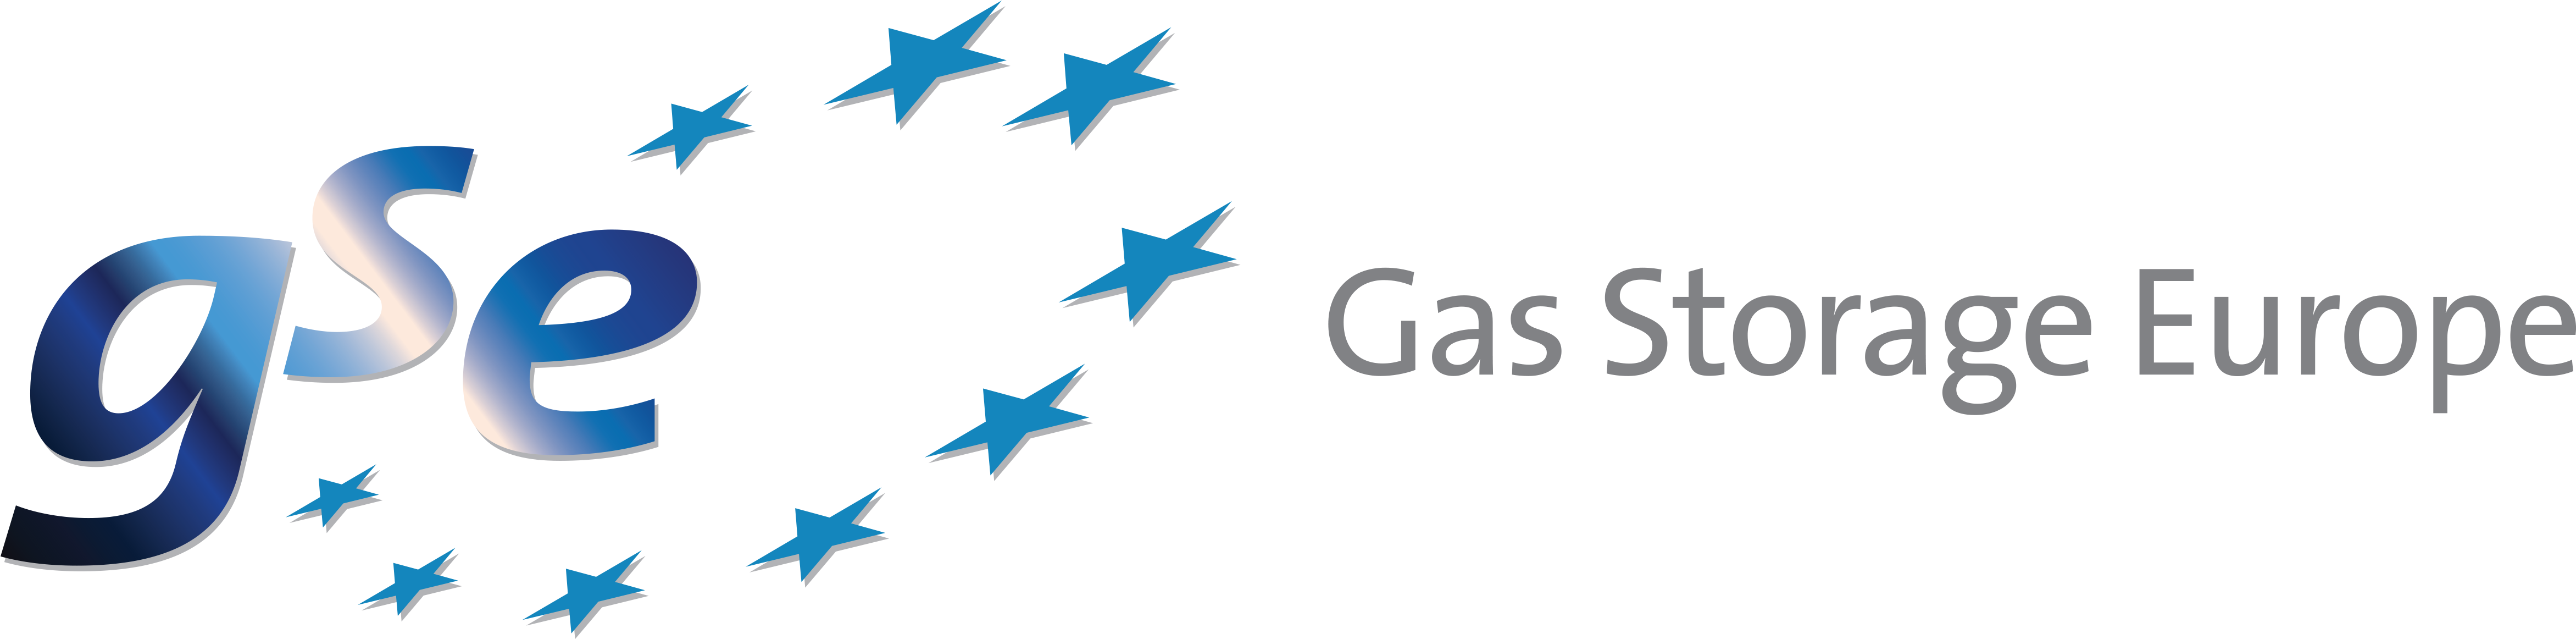 G S E Logowith Blue Stars